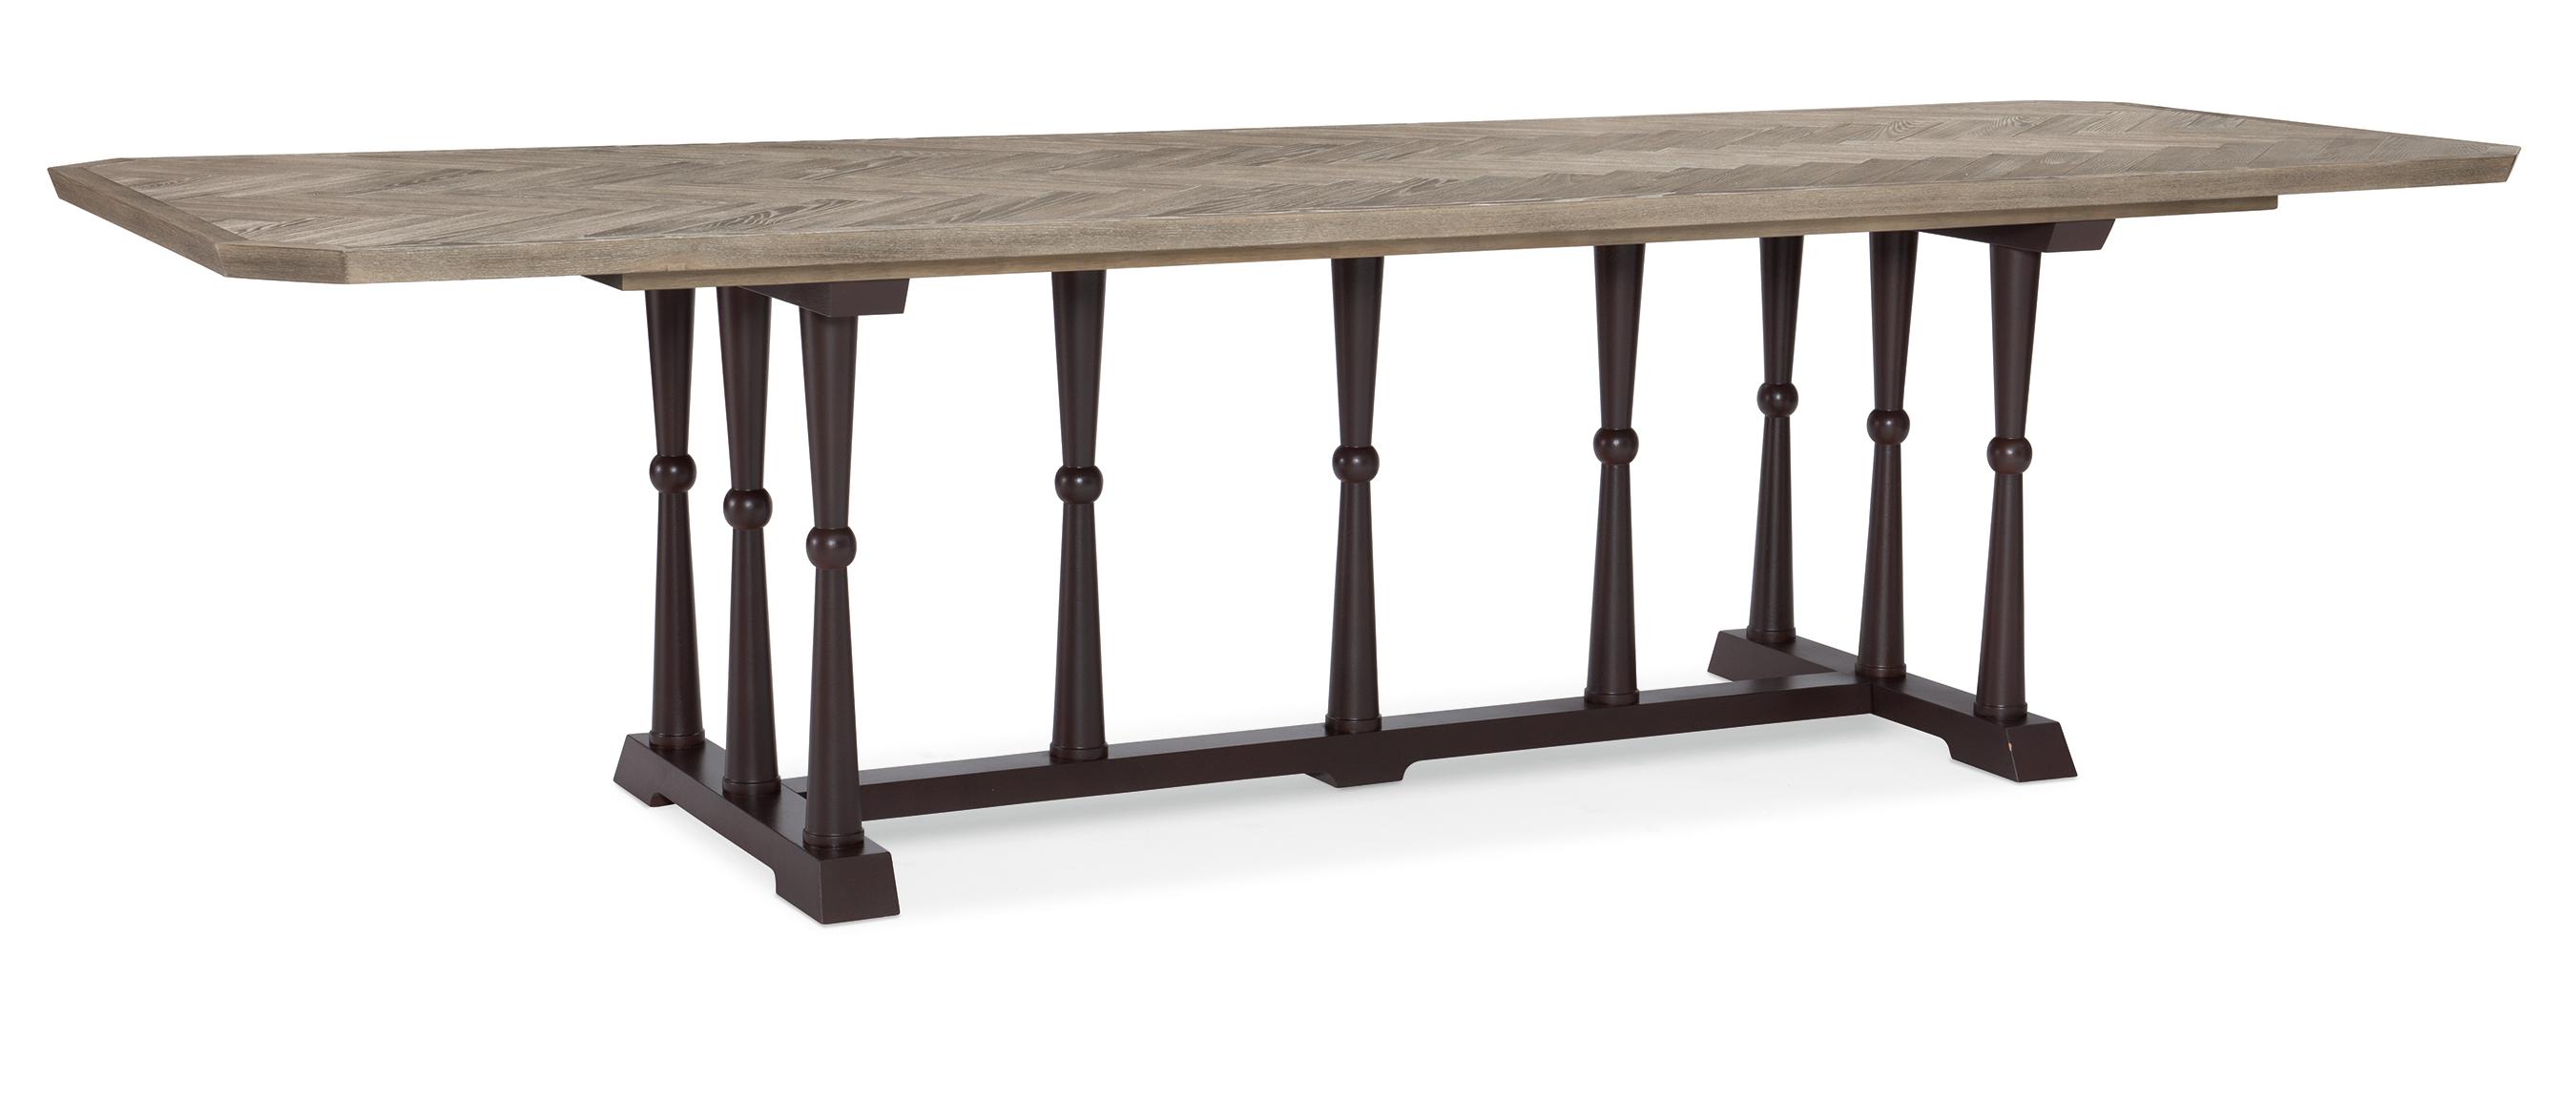 Traditional Dining Table DINNER CIRCUIT 96 CLA-019-205 in Driftwood, Chocolate 